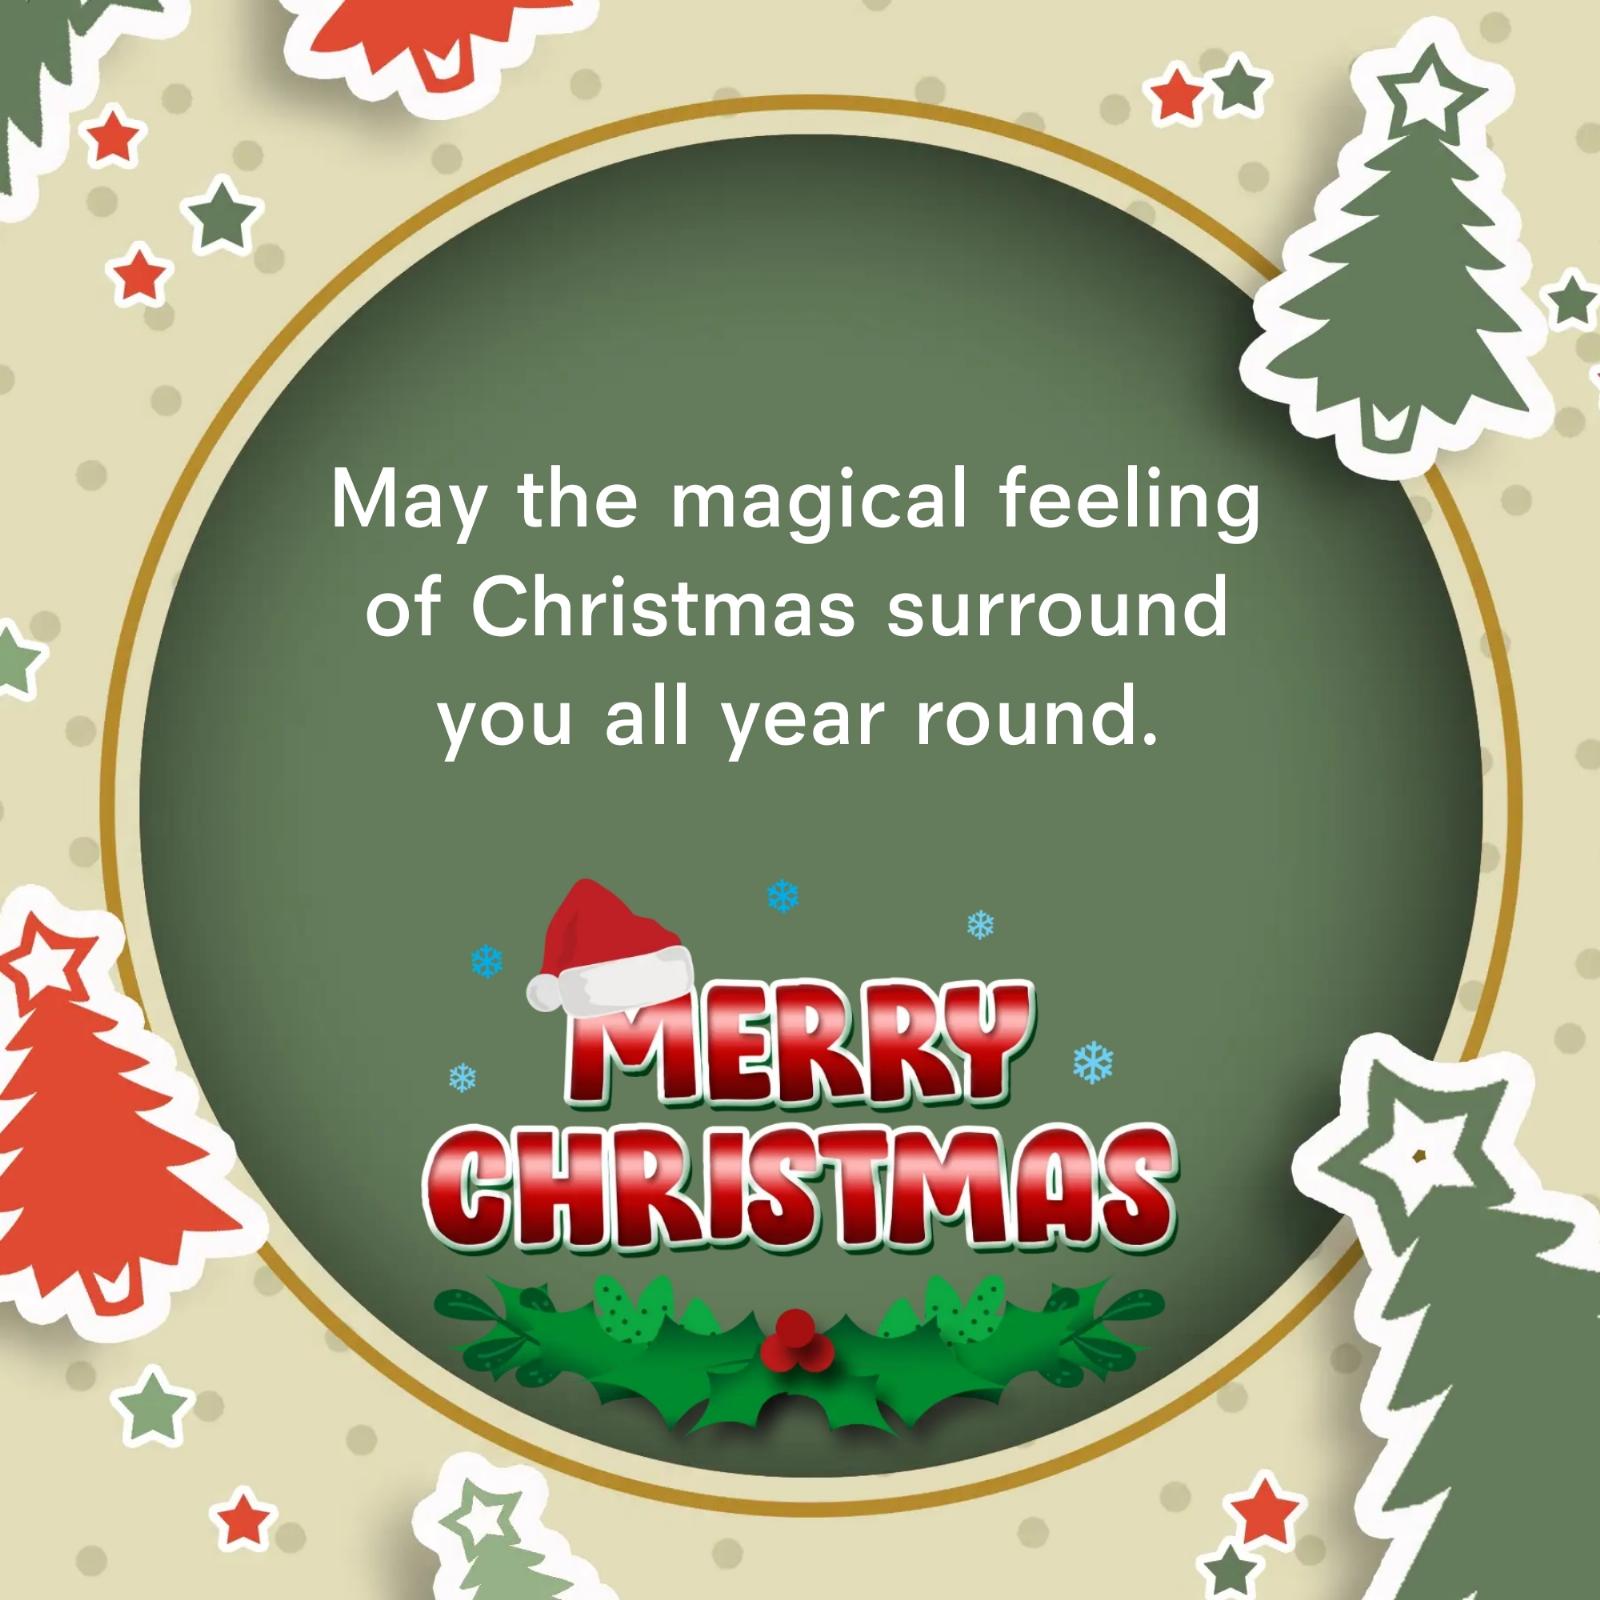 May the magical feeling of Christmas surround you all year round